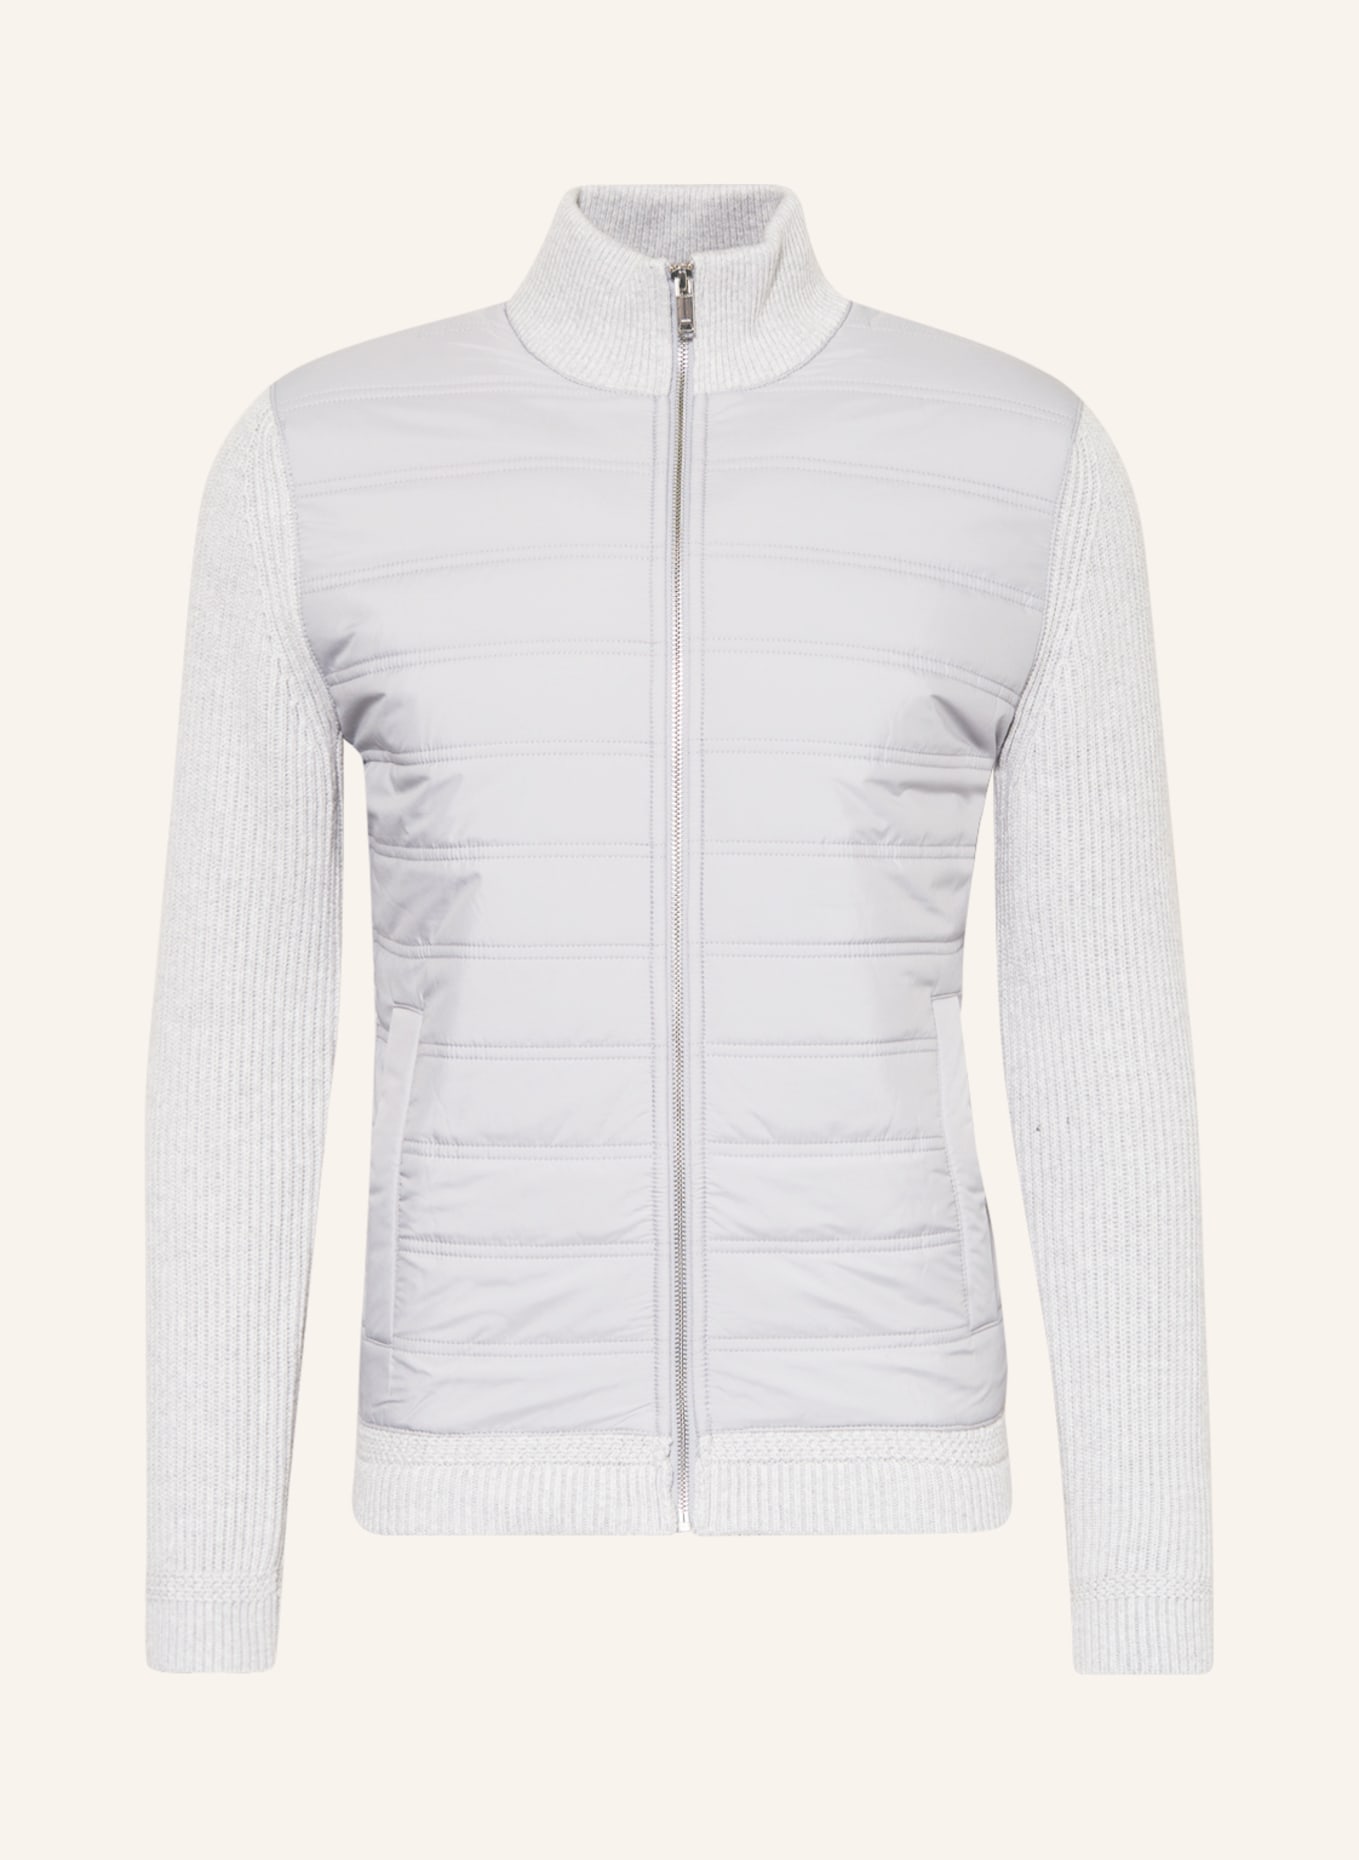 REISS Jacket TRAINER in mixed materials, Color: LIGHT GRAY (Image 1)